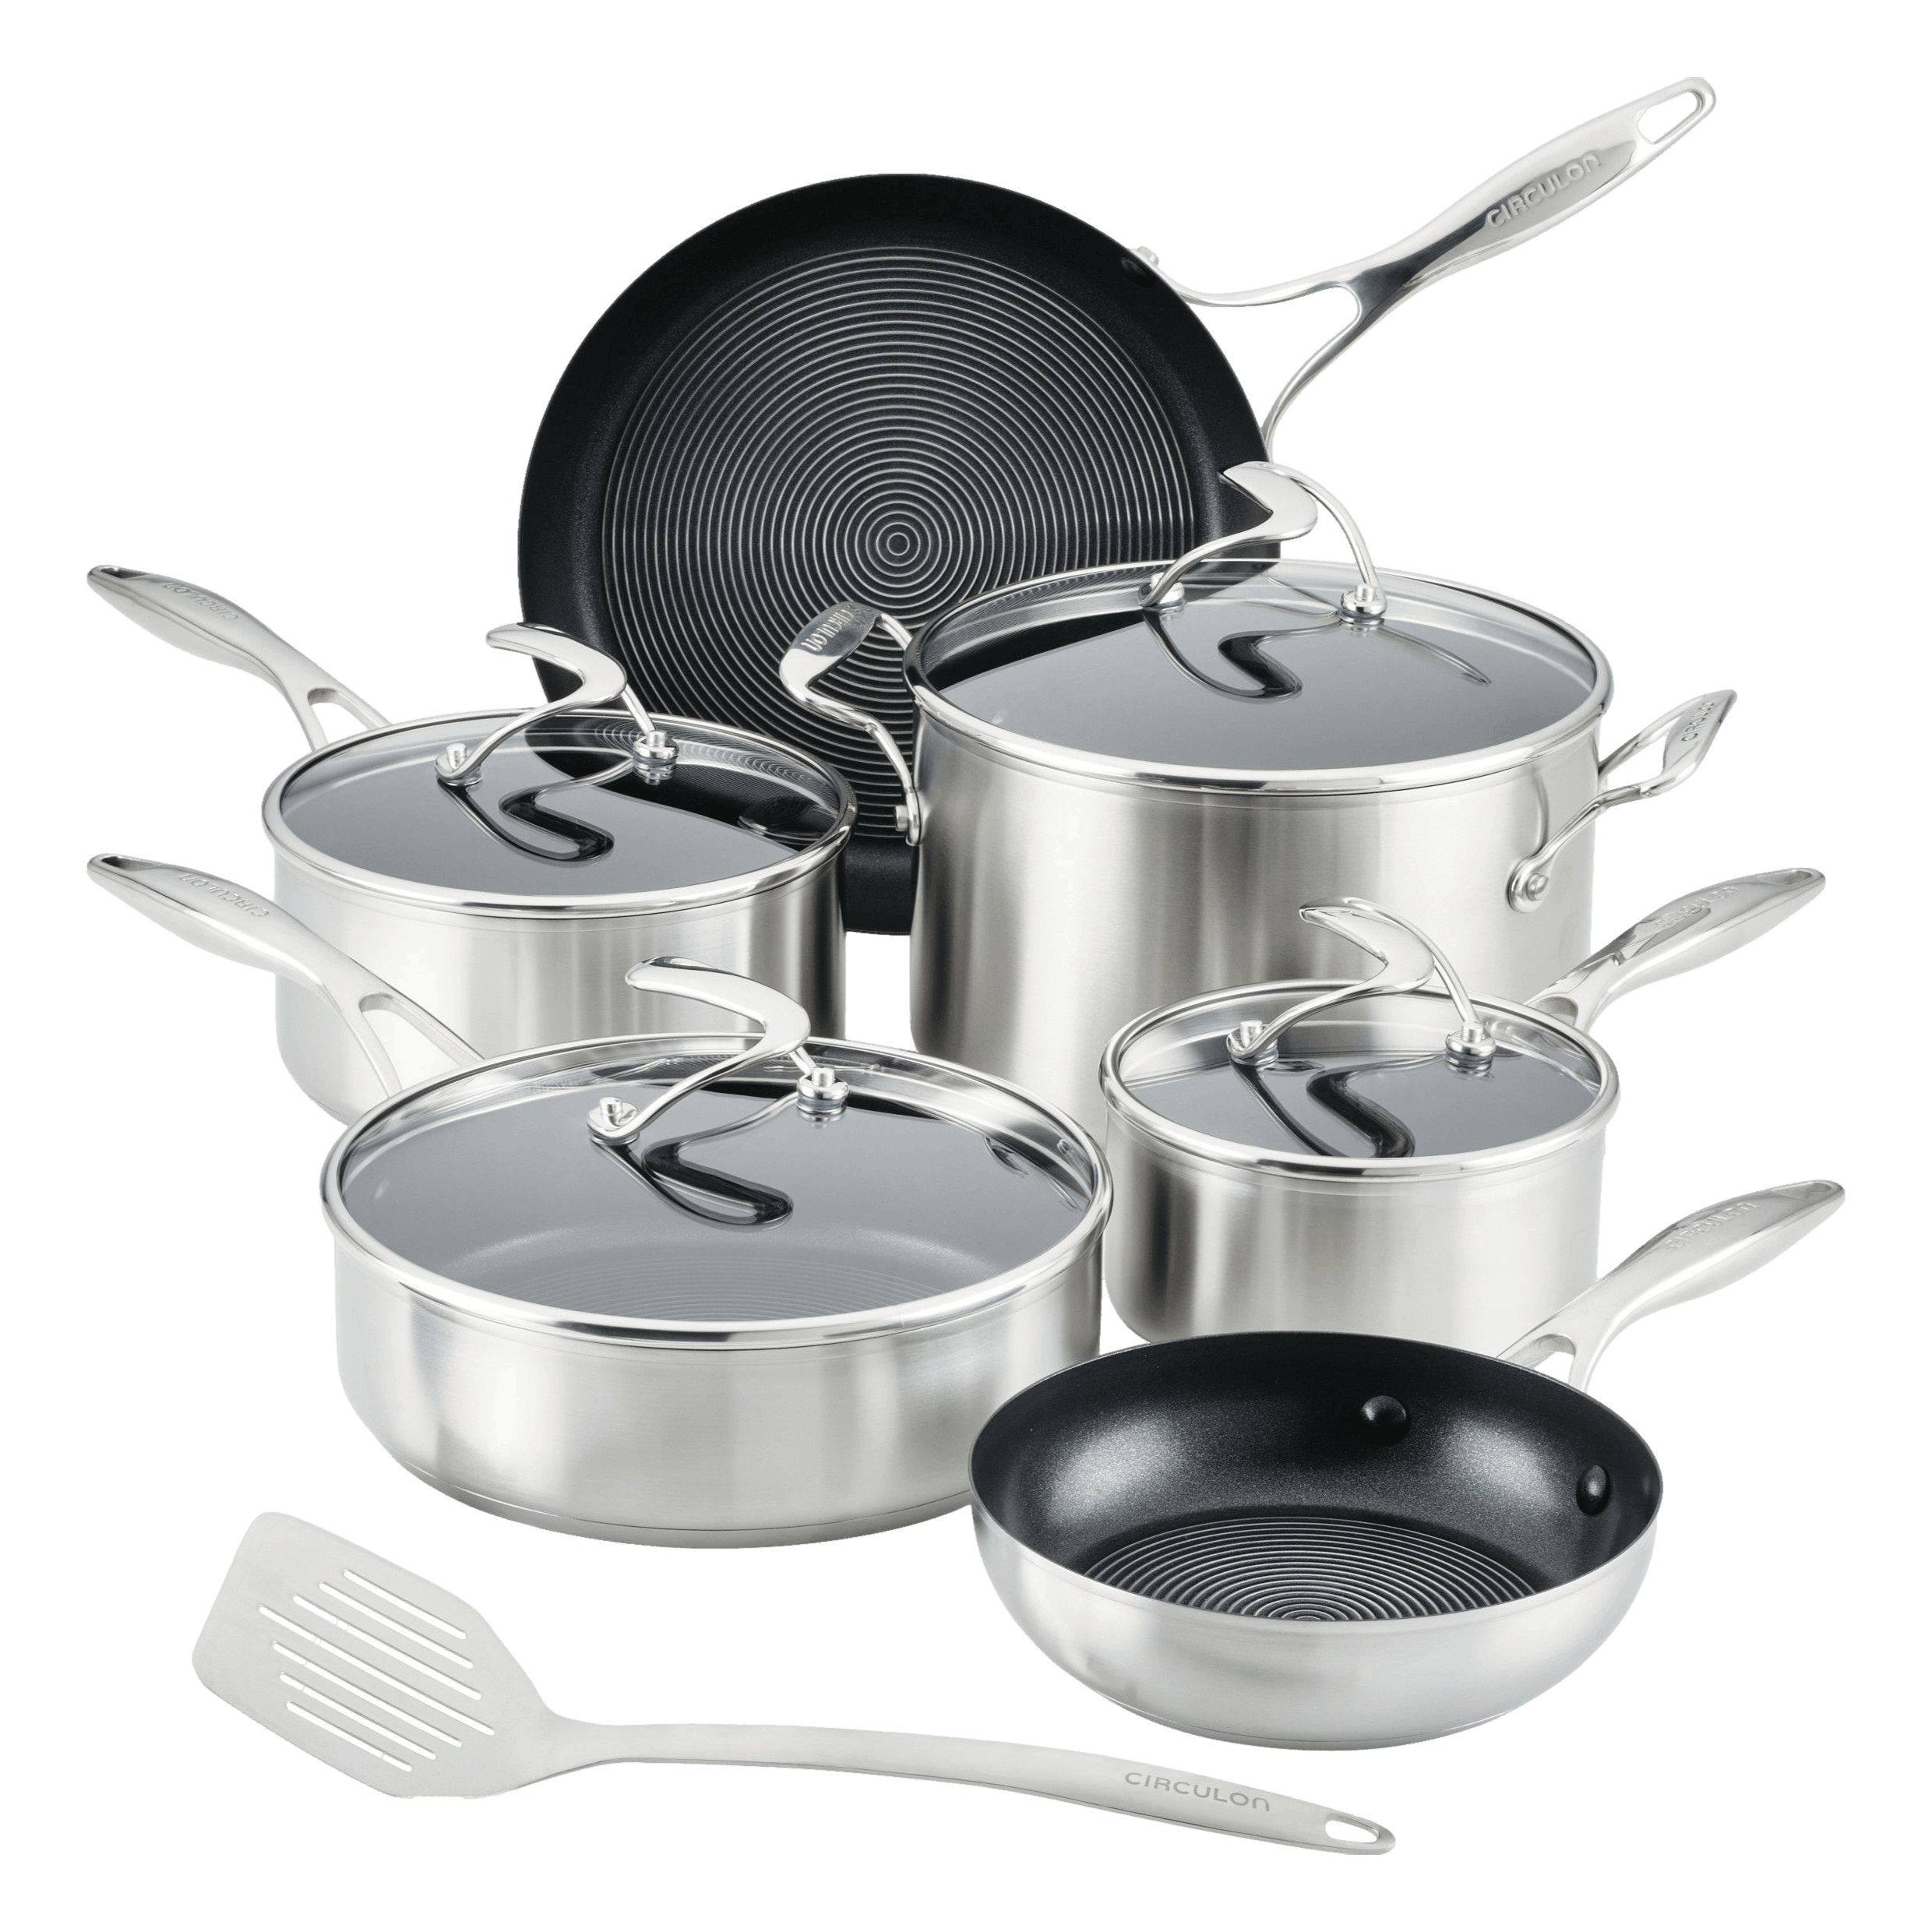 Kitchenaid Vs Cuisinart Stainless Steel Cookware: Ultimate Comparison